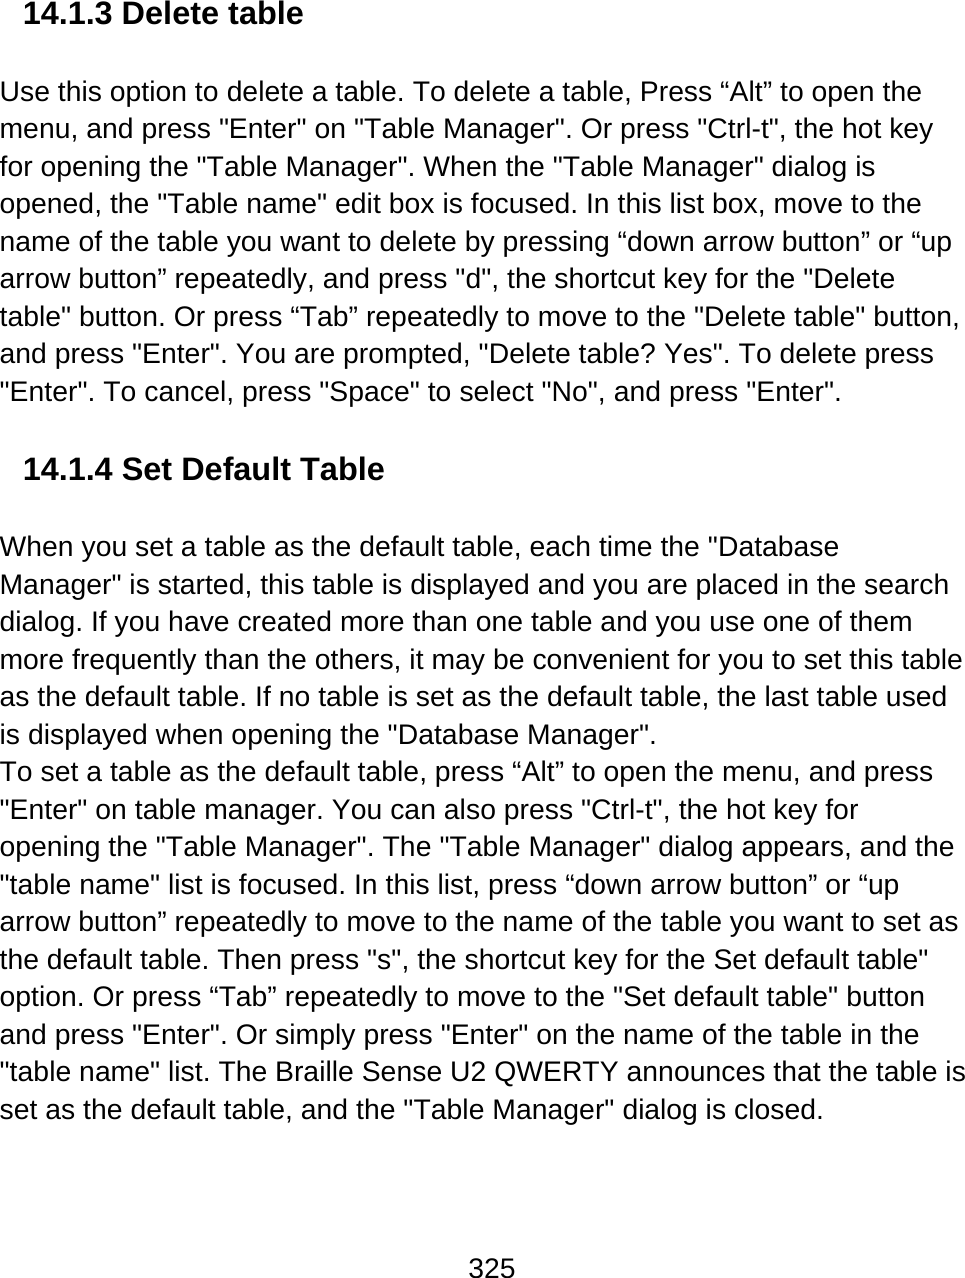 325   14.1.3 Delete table  Use this option to delete a table. To delete a table, Press “Alt” to open the menu, and press &quot;Enter&quot; on &quot;Table Manager&quot;. Or press &quot;Ctrl-t&quot;, the hot key for opening the &quot;Table Manager&quot;. When the &quot;Table Manager&quot; dialog is opened, the &quot;Table name&quot; edit box is focused. In this list box, move to the name of the table you want to delete by pressing “down arrow button” or “up arrow button” repeatedly, and press &quot;d&quot;, the shortcut key for the &quot;Delete table&quot; button. Or press “Tab” repeatedly to move to the &quot;Delete table&quot; button, and press &quot;Enter&quot;. You are prompted, &quot;Delete table? Yes&quot;. To delete press &quot;Enter&quot;. To cancel, press &quot;Space&quot; to select &quot;No&quot;, and press &quot;Enter&quot;.  14.1.4 Set Default Table  When you set a table as the default table, each time the &quot;Database Manager&quot; is started, this table is displayed and you are placed in the search dialog. If you have created more than one table and you use one of them more frequently than the others, it may be convenient for you to set this table as the default table. If no table is set as the default table, the last table used is displayed when opening the &quot;Database Manager&quot;.  To set a table as the default table, press “Alt” to open the menu, and press &quot;Enter&quot; on table manager. You can also press &quot;Ctrl-t&quot;, the hot key for opening the &quot;Table Manager&quot;. The &quot;Table Manager&quot; dialog appears, and the &quot;table name&quot; list is focused. In this list, press “down arrow button” or “up arrow button” repeatedly to move to the name of the table you want to set as the default table. Then press &quot;s&quot;, the shortcut key for the Set default table&quot; option. Or press “Tab” repeatedly to move to the &quot;Set default table&quot; button and press &quot;Enter&quot;. Or simply press &quot;Enter&quot; on the name of the table in the &quot;table name&quot; list. The Braille Sense U2 QWERTY announces that the table is set as the default table, and the &quot;Table Manager&quot; dialog is closed.  